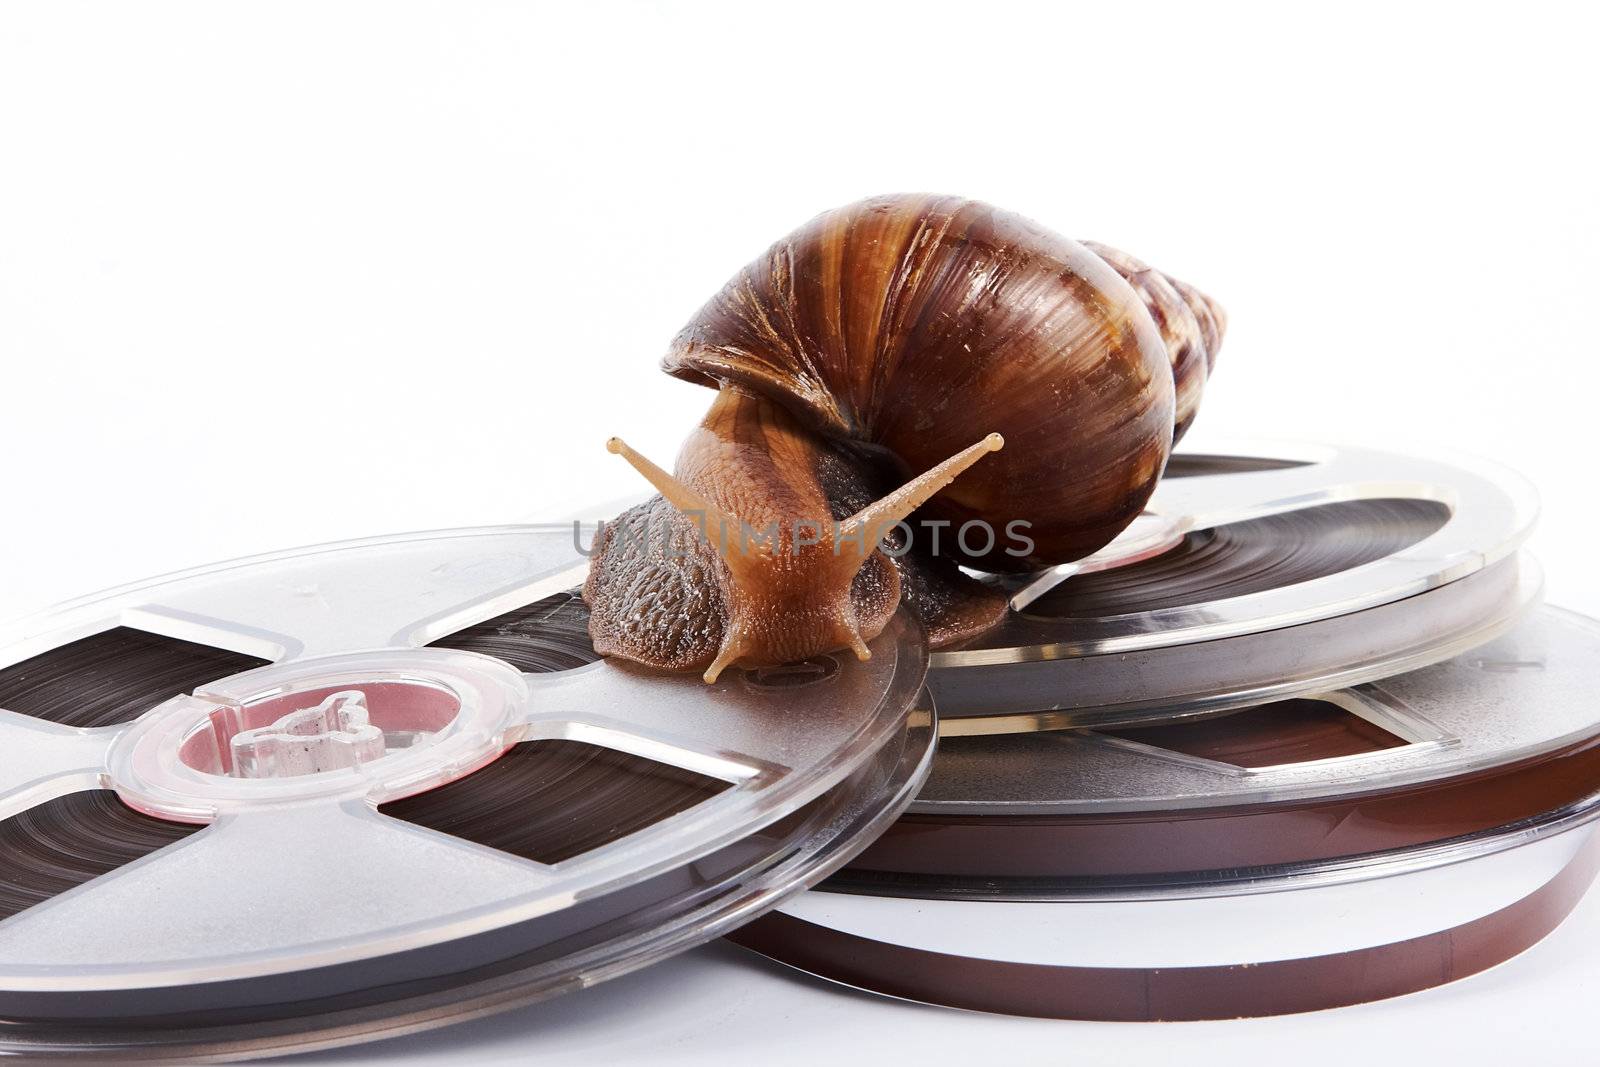 The snail creeps on a recorder tape on a white background